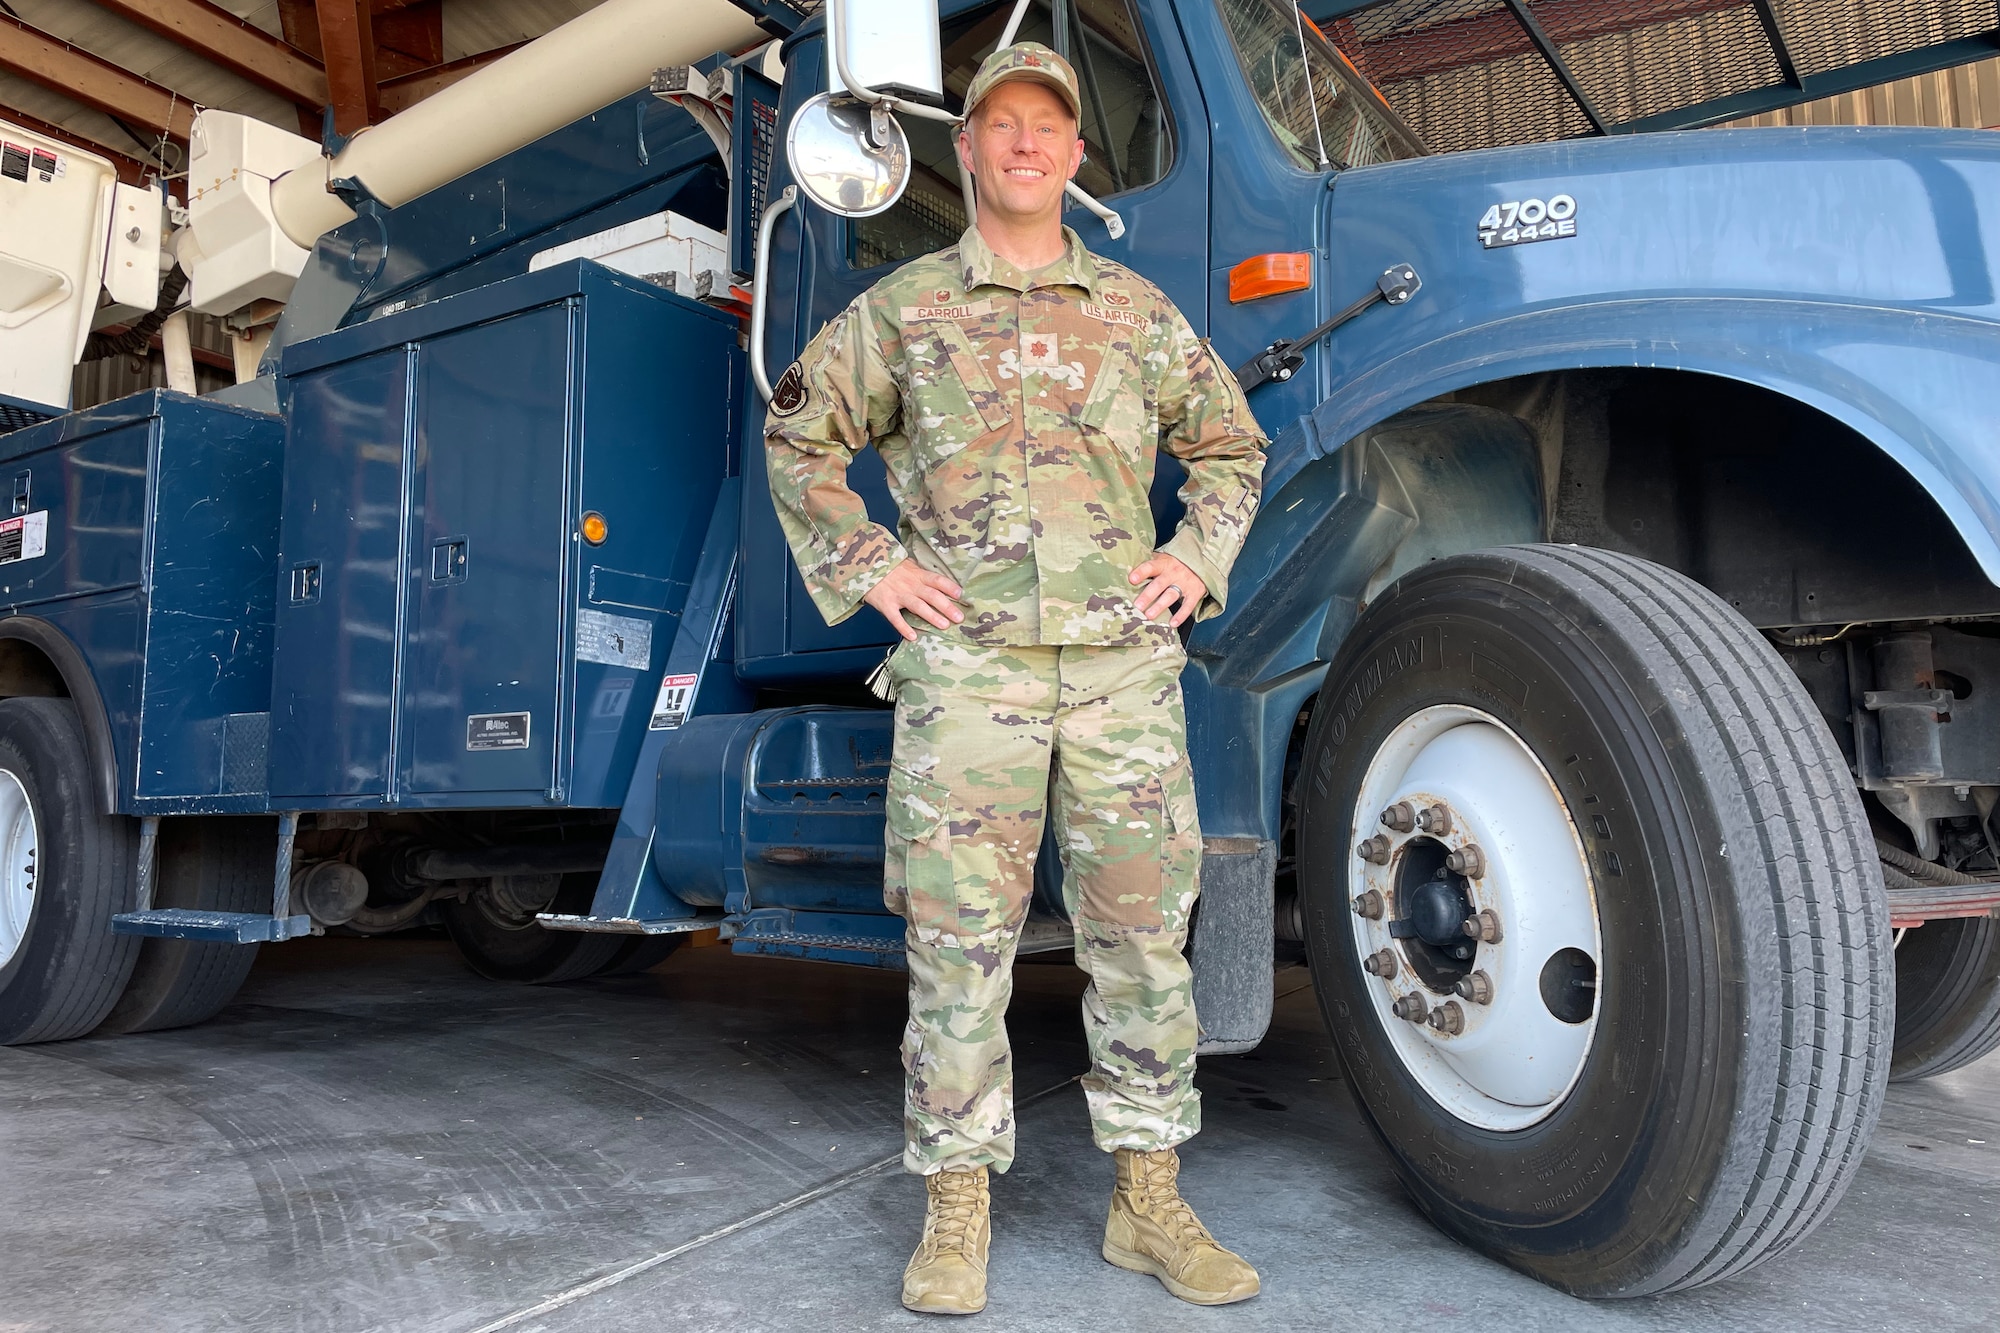 U.S. Air Force Maj. Joshua Carroll, 17th Civil Engineer Squadron commander, stands in front of a bucket truck, which contains a hydraulic lift used by 17th CE technicians at Goodfellow Air Force Base, Texas, July 18, 2022. Carroll took command June 17 and looks forward to leading efforts in building modernized tech training and combat support facilities. (U.S. Air Force photo by Senior Airman Abbey Rieves)